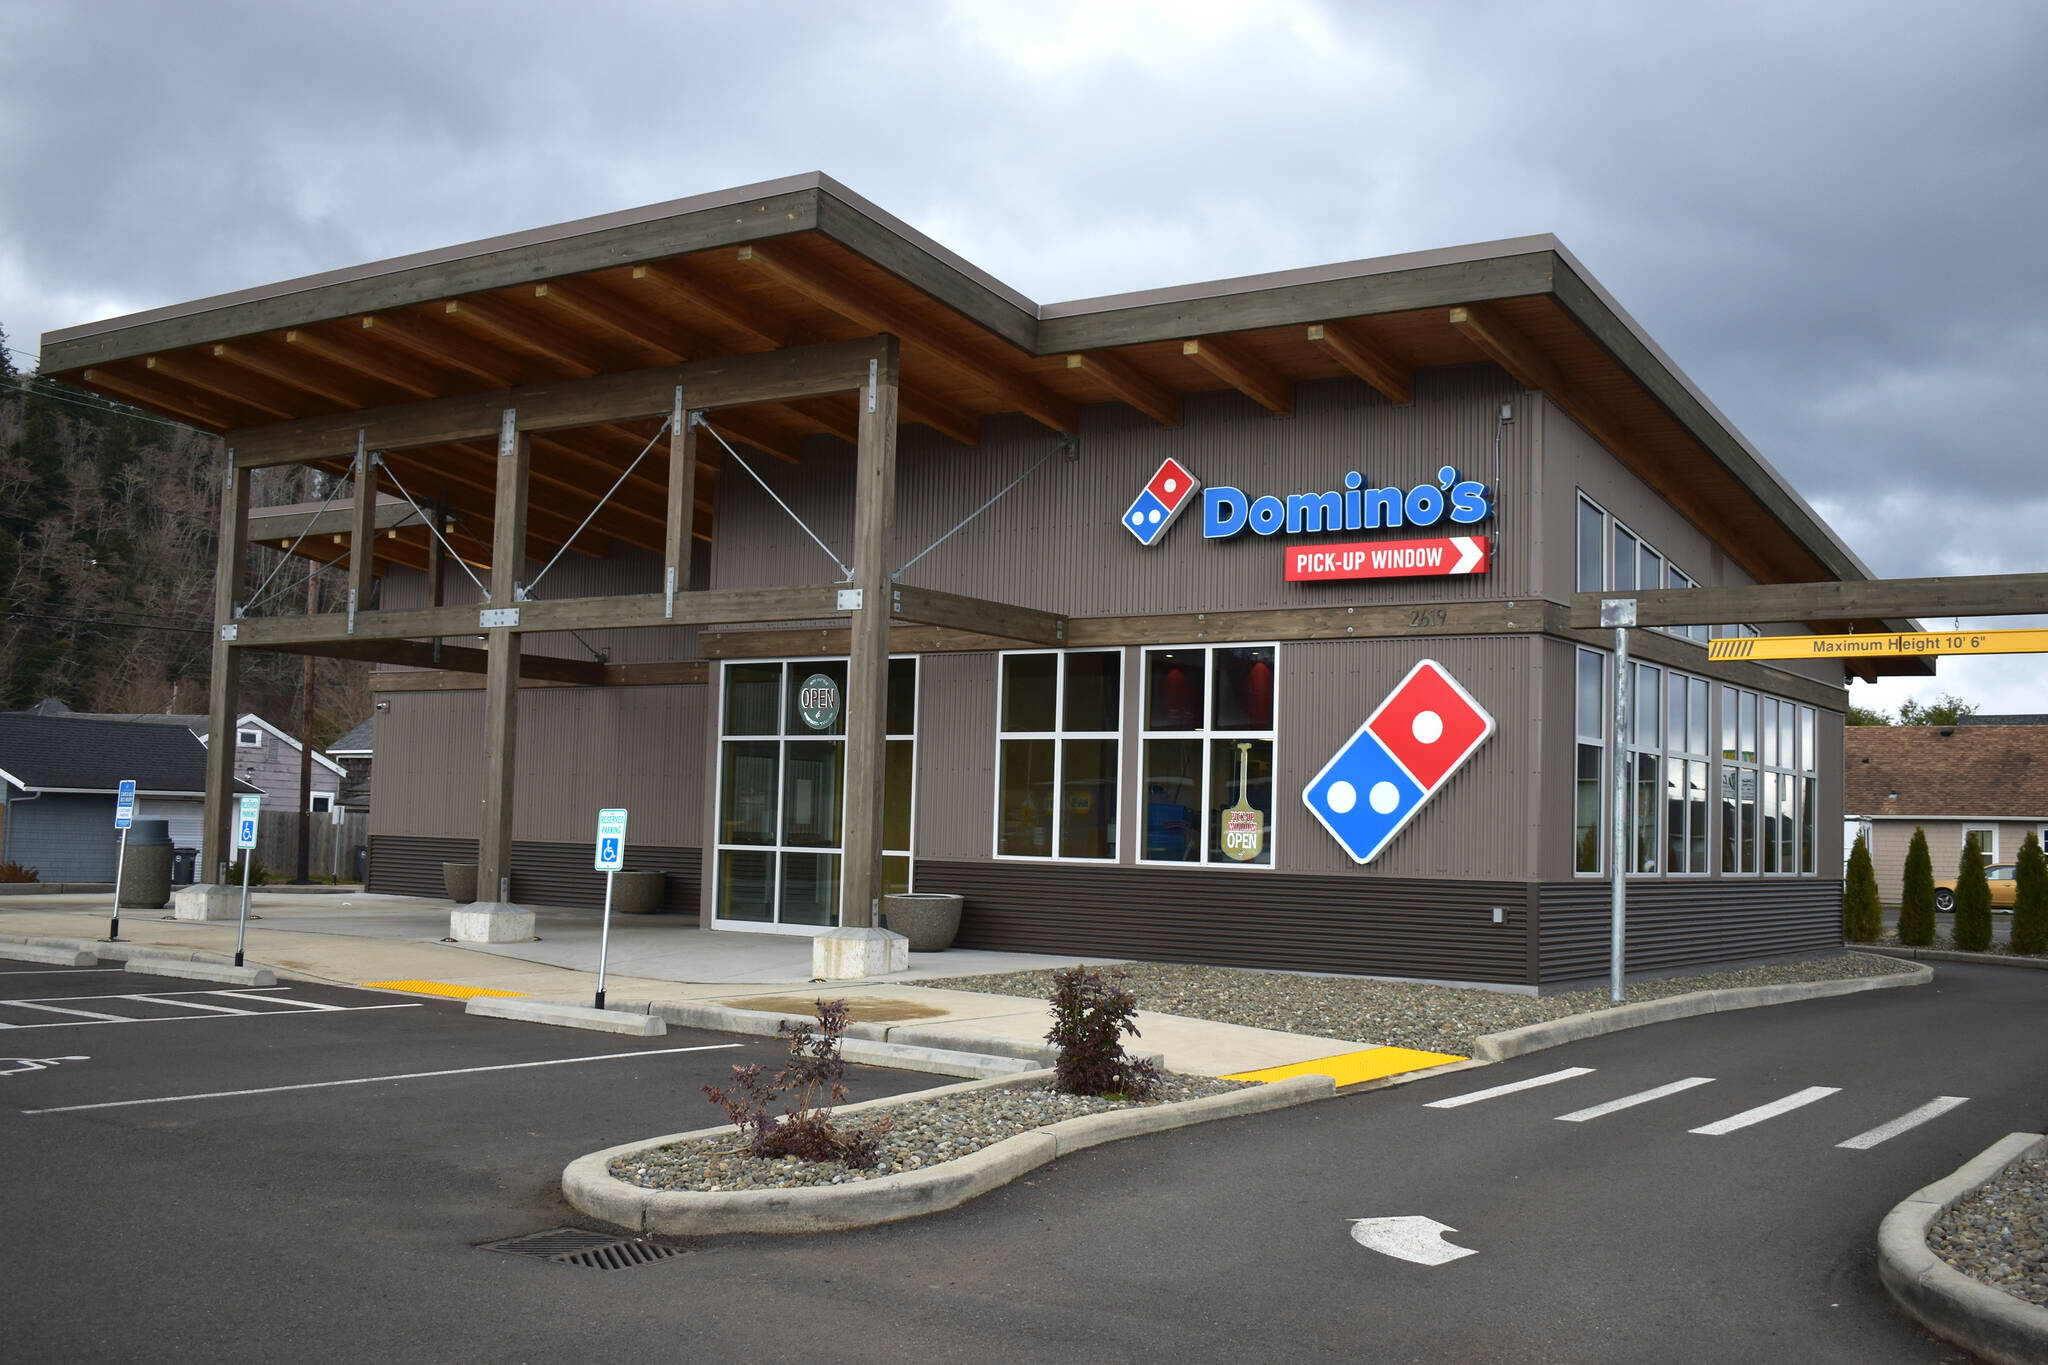 Matthew N. Wells / The Daily World
Monika Kuhnau, new partner at Harbor Architects LLC., in Aberdeen, spoke about a few of the projects she’s really liked being a part of since she started at the firm full-time in 2013. Domino’s — 2619 Simpson Ave., in Hoquiam — is one of those projects she mentioned. “More recently, working on the design on the new Domino’s store in Hoquiam. That was a really fun one to do,” Kuhnau said.